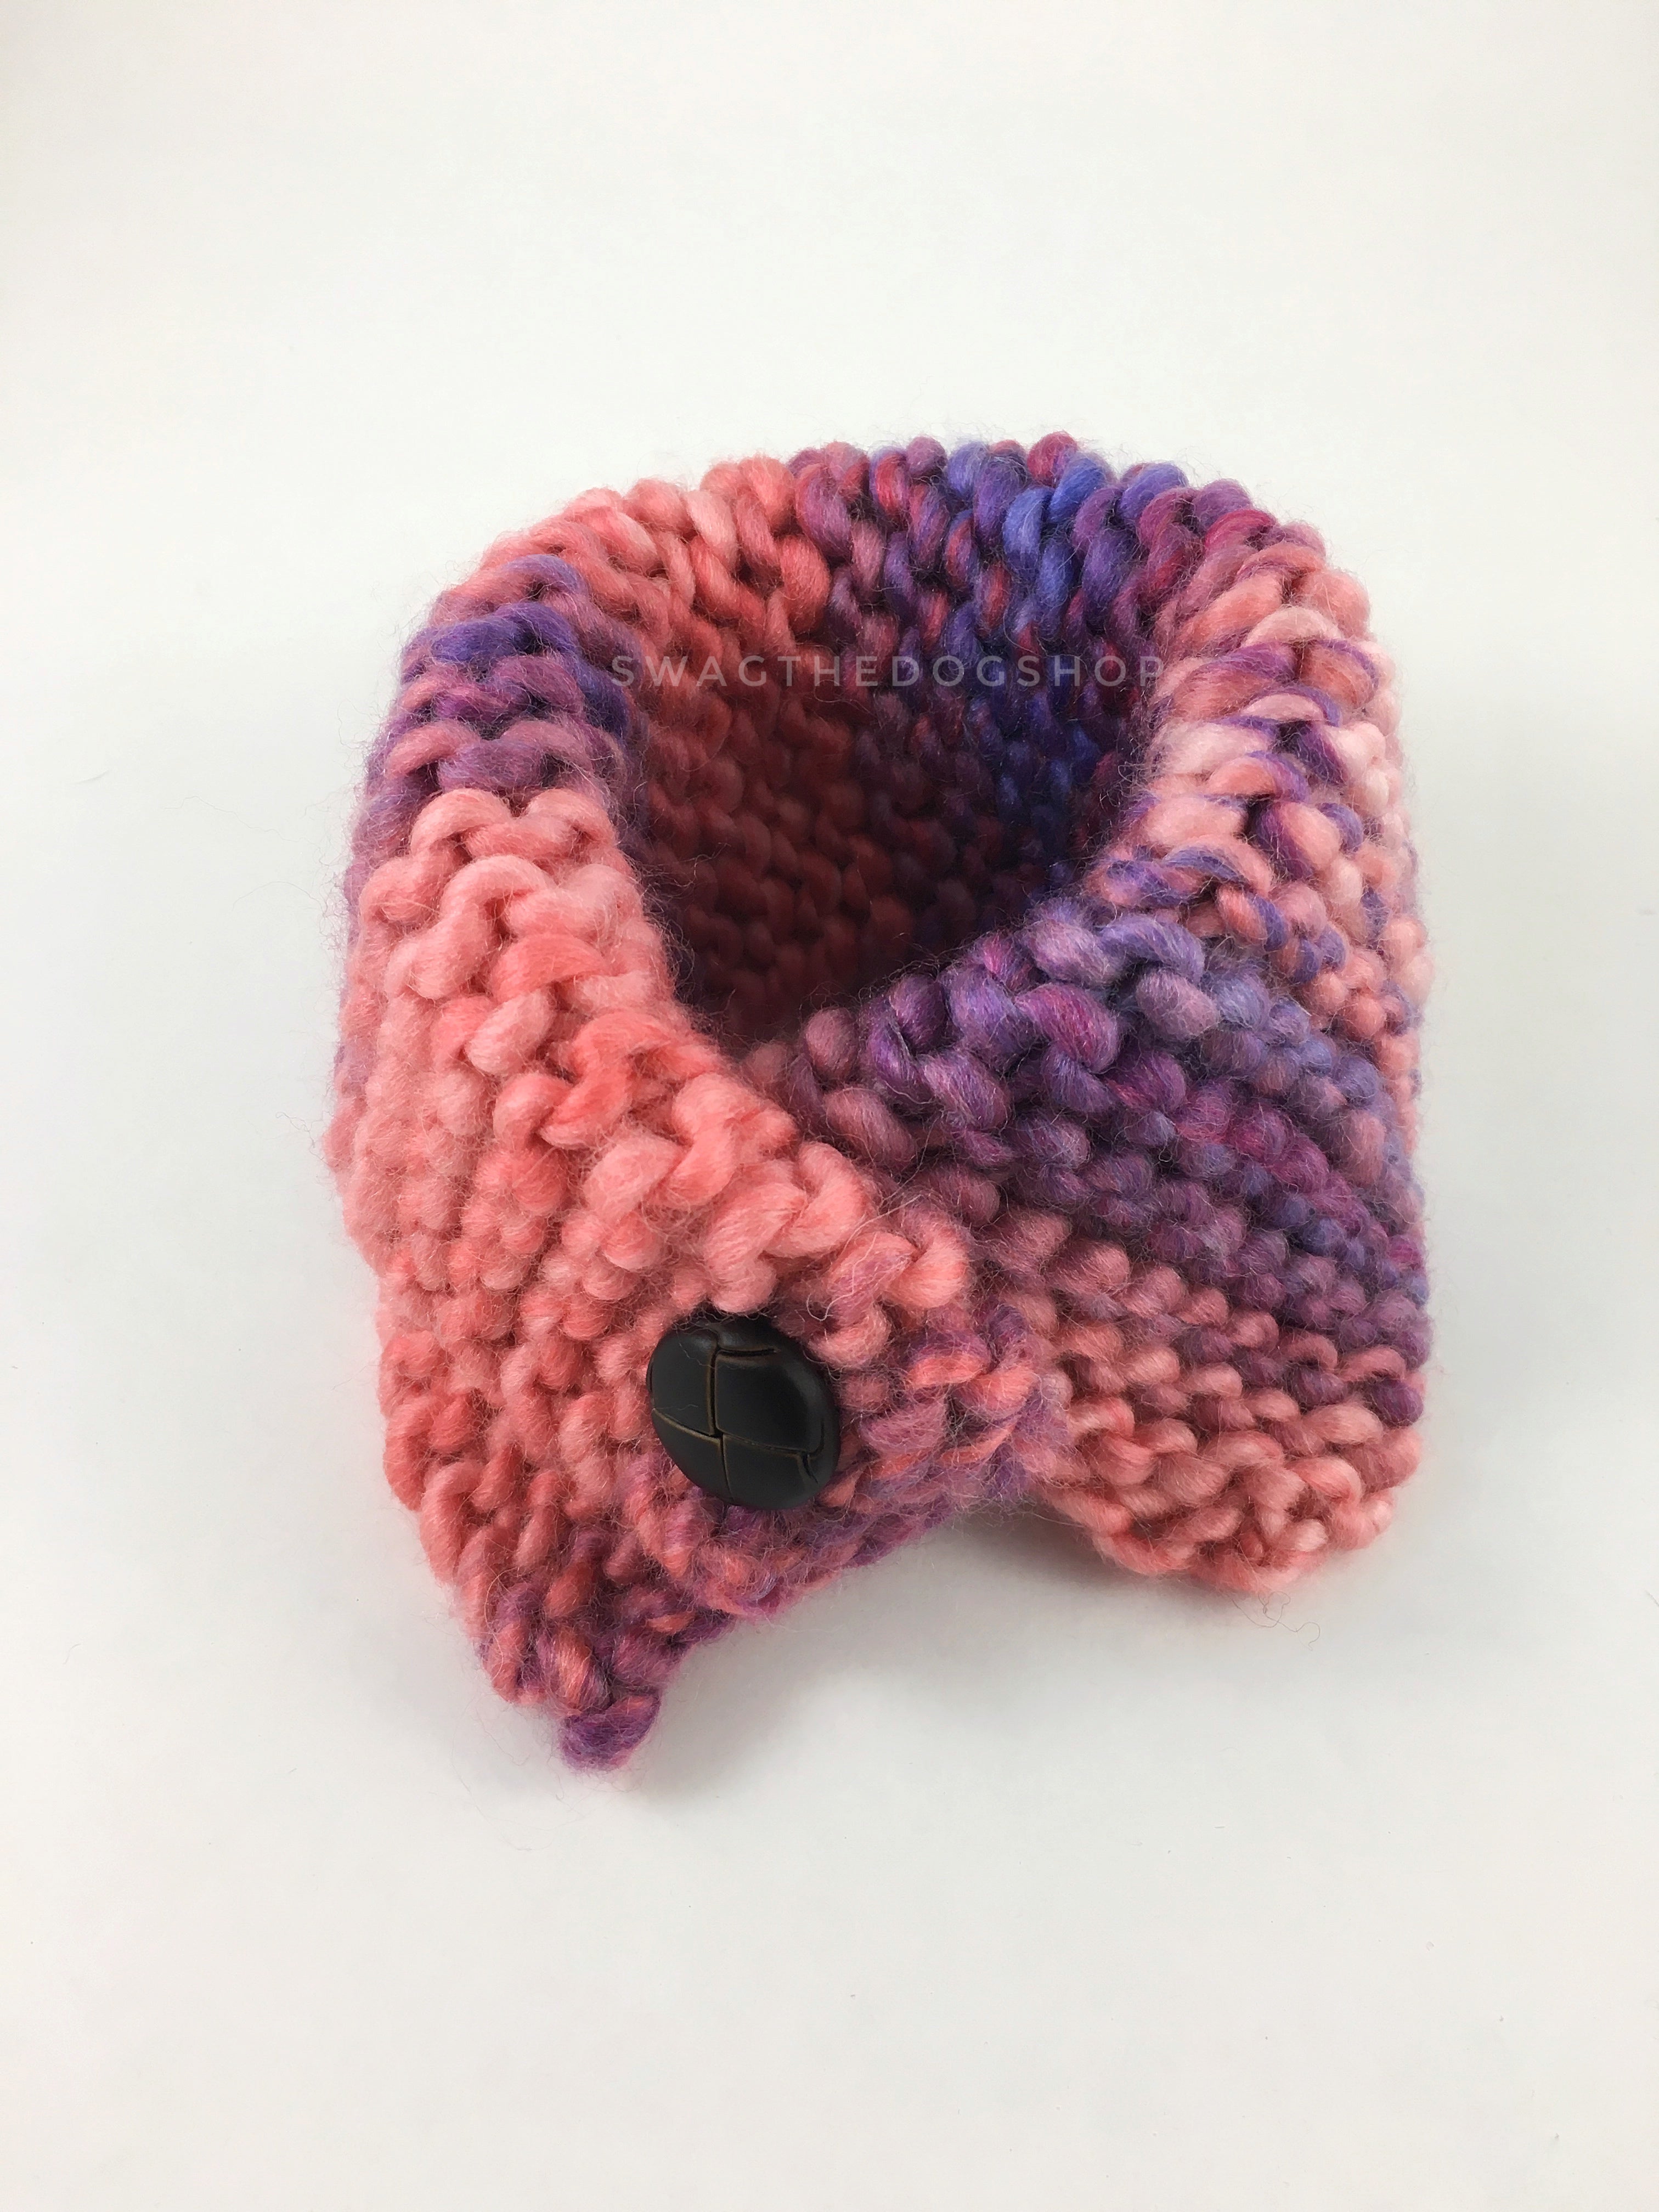 Cotton Candy Swagsnood - Product Above View. Mixed Color of Pink, Purple and Salmon Pink Dog Snood with Accent Button